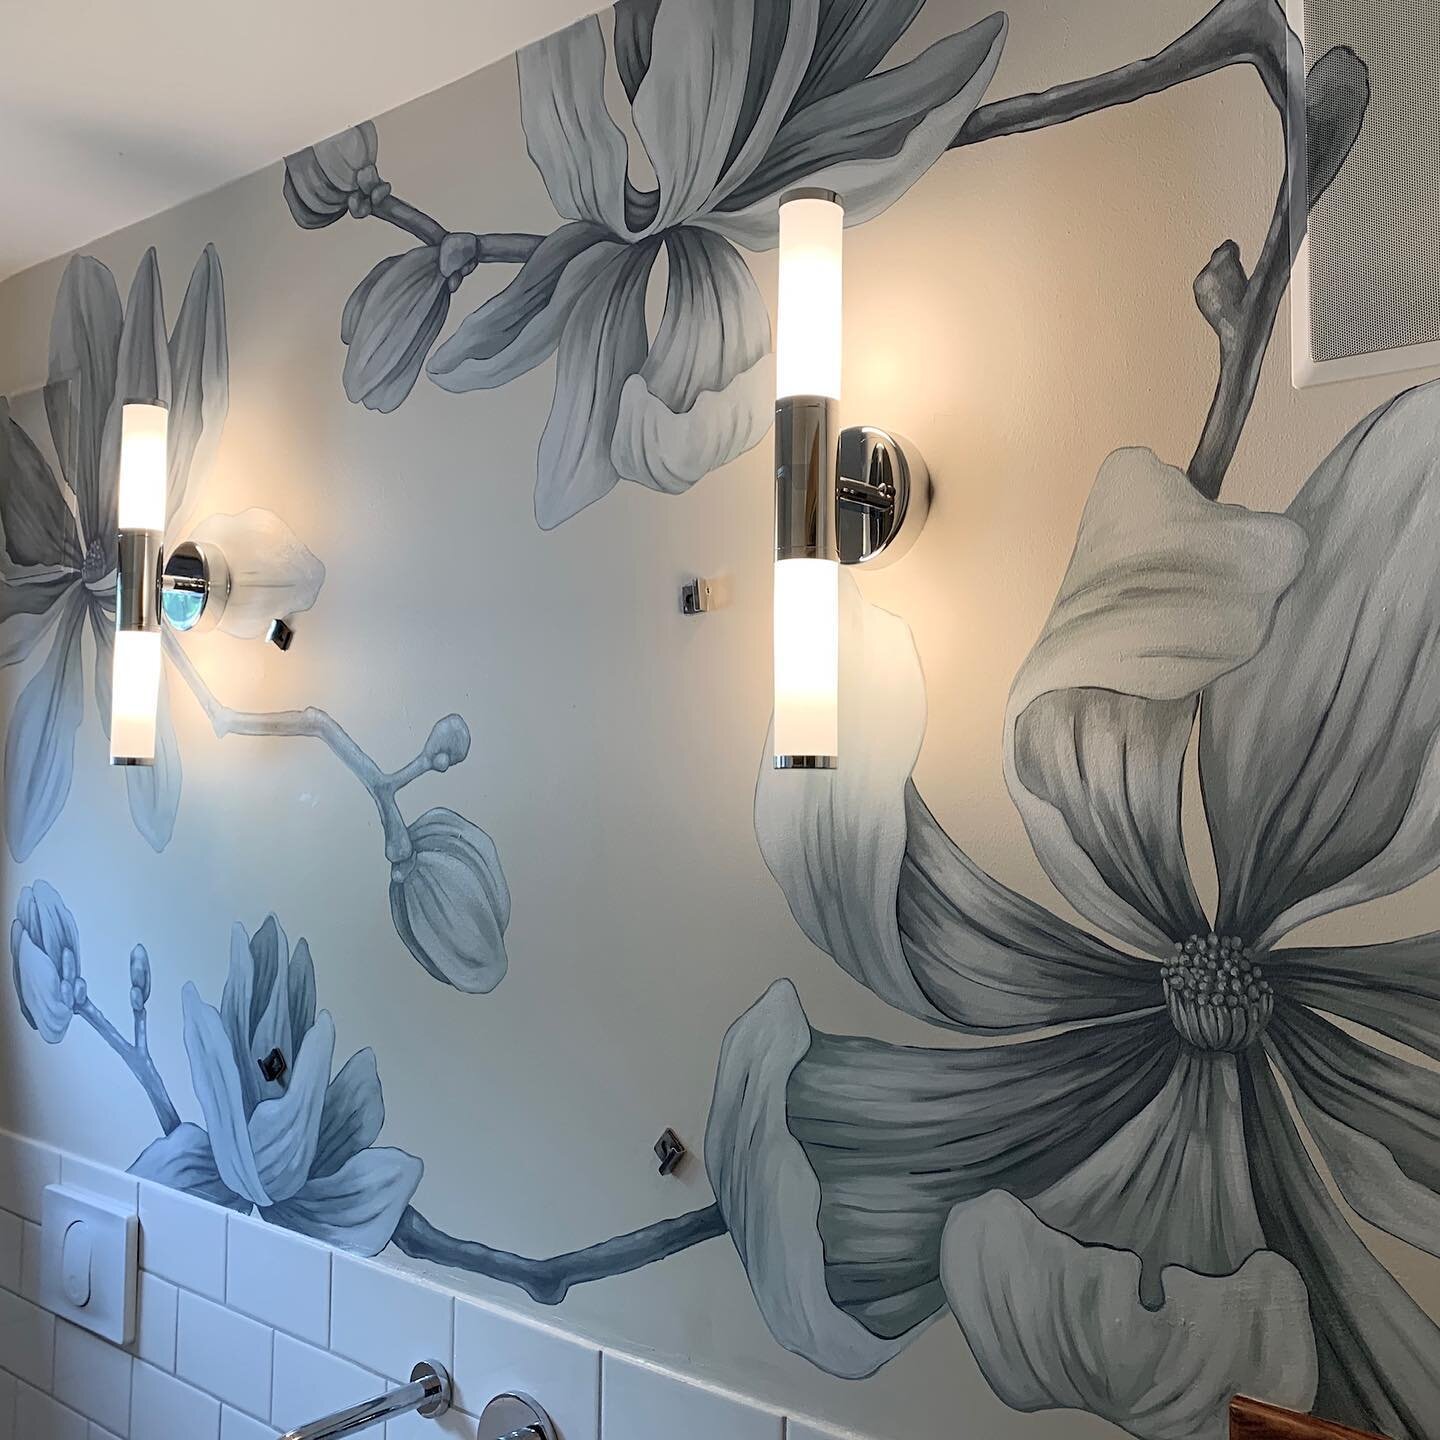 Bathroom Blooms 🎨 This client wanted add a hand painted treatment to her new bathroom. Everything else in the bath was very monochromatic so we wanted to keep the design subtle while also creating a fun statement piece for her to enjoy. I used subtl